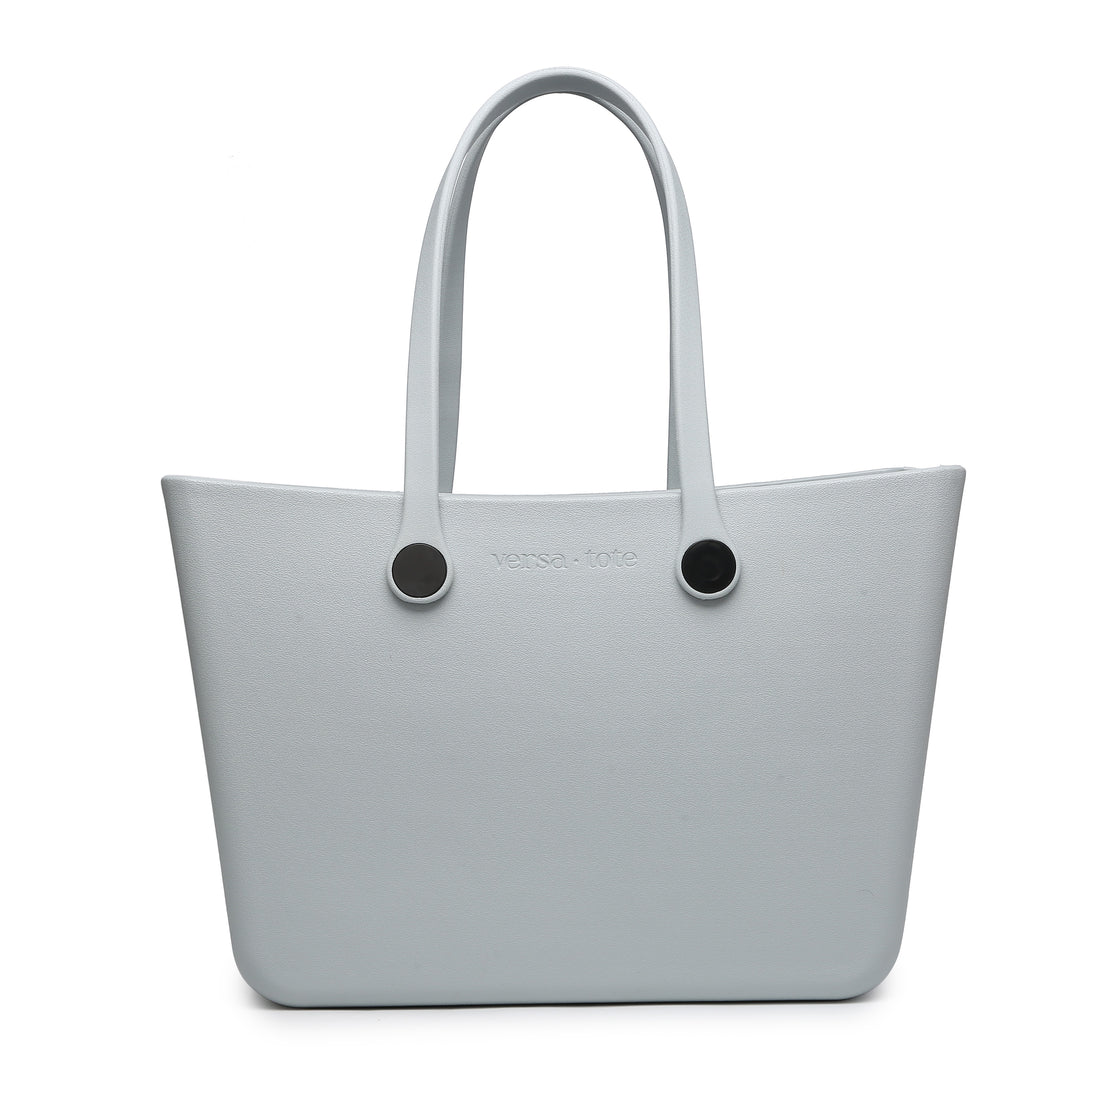 Sac fourre-tout - Carrie All tote (Pale grey)